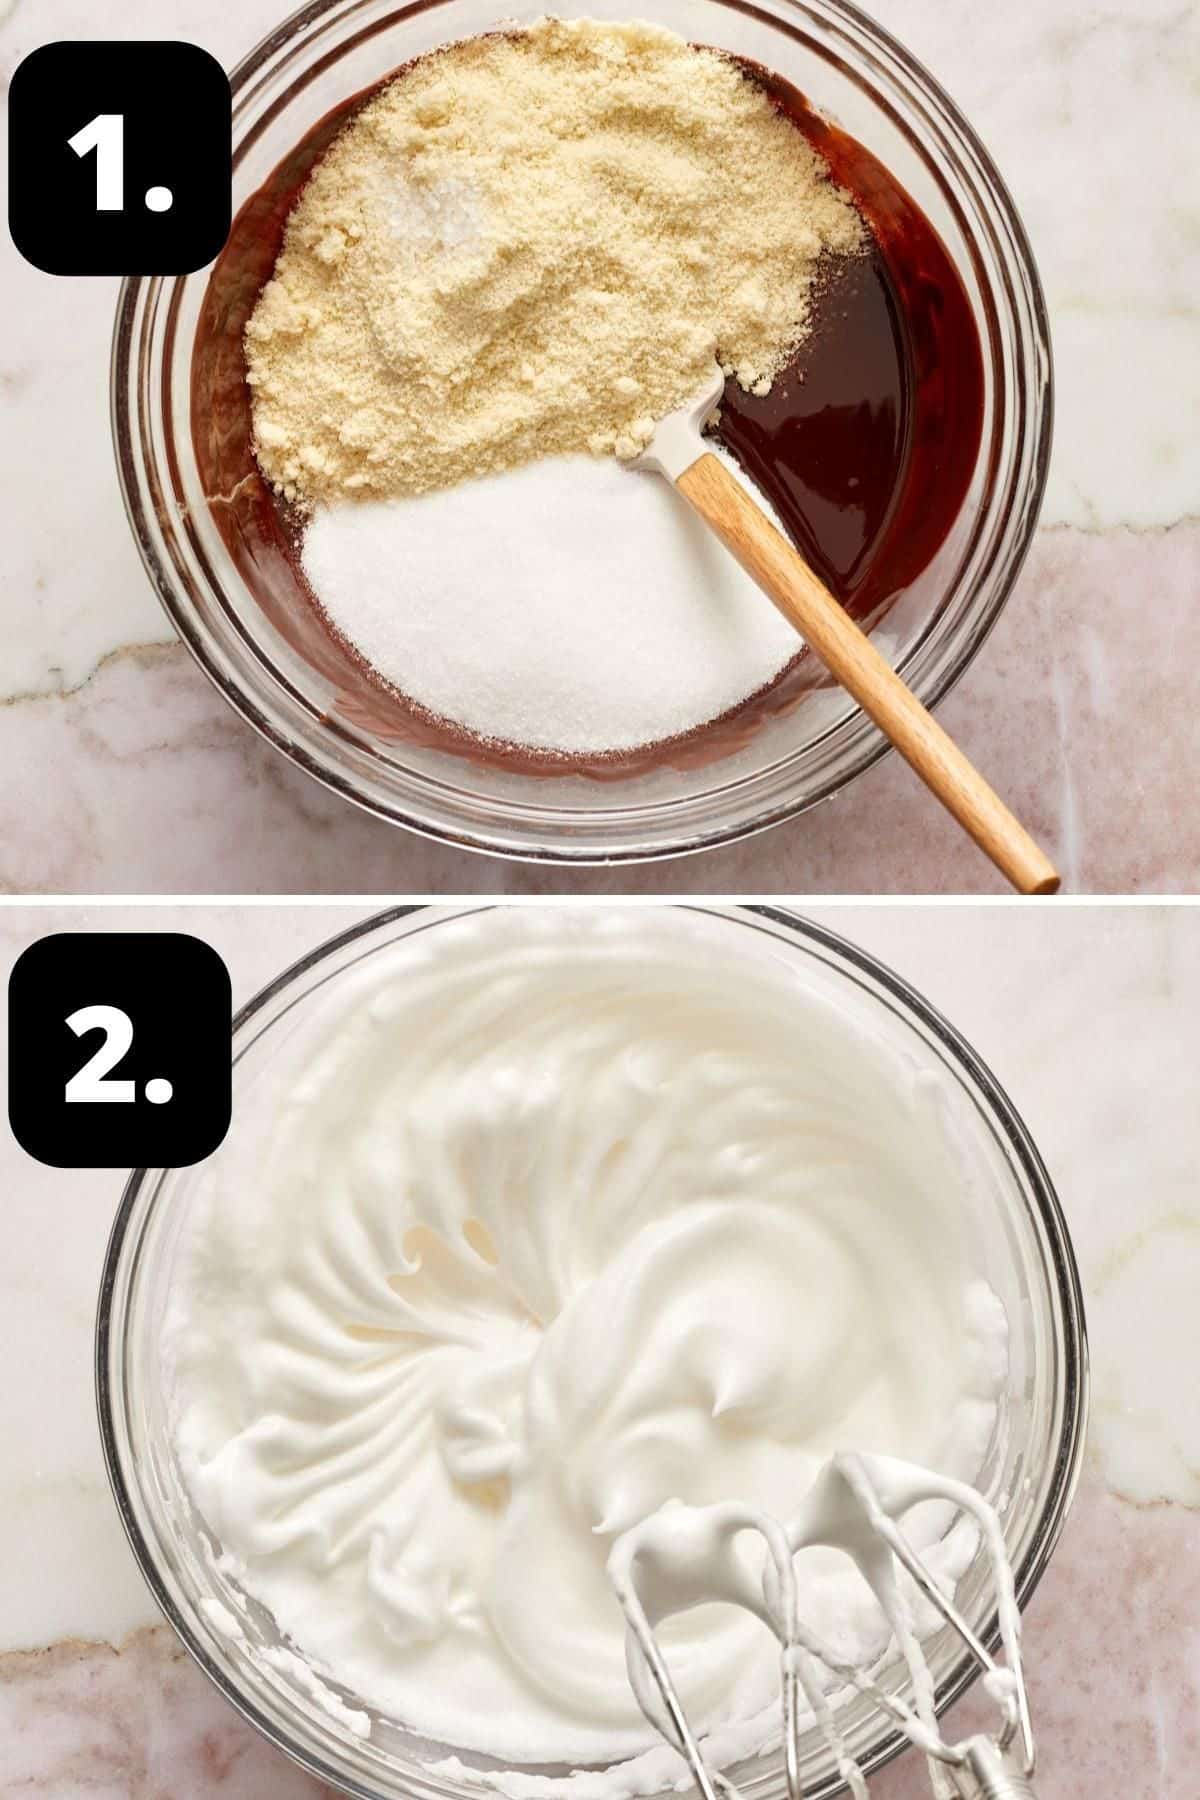 Steps 1-2 of preparing this recipe: the ingredients for the base of the cake in a glass bowl and the whipped egg whites.